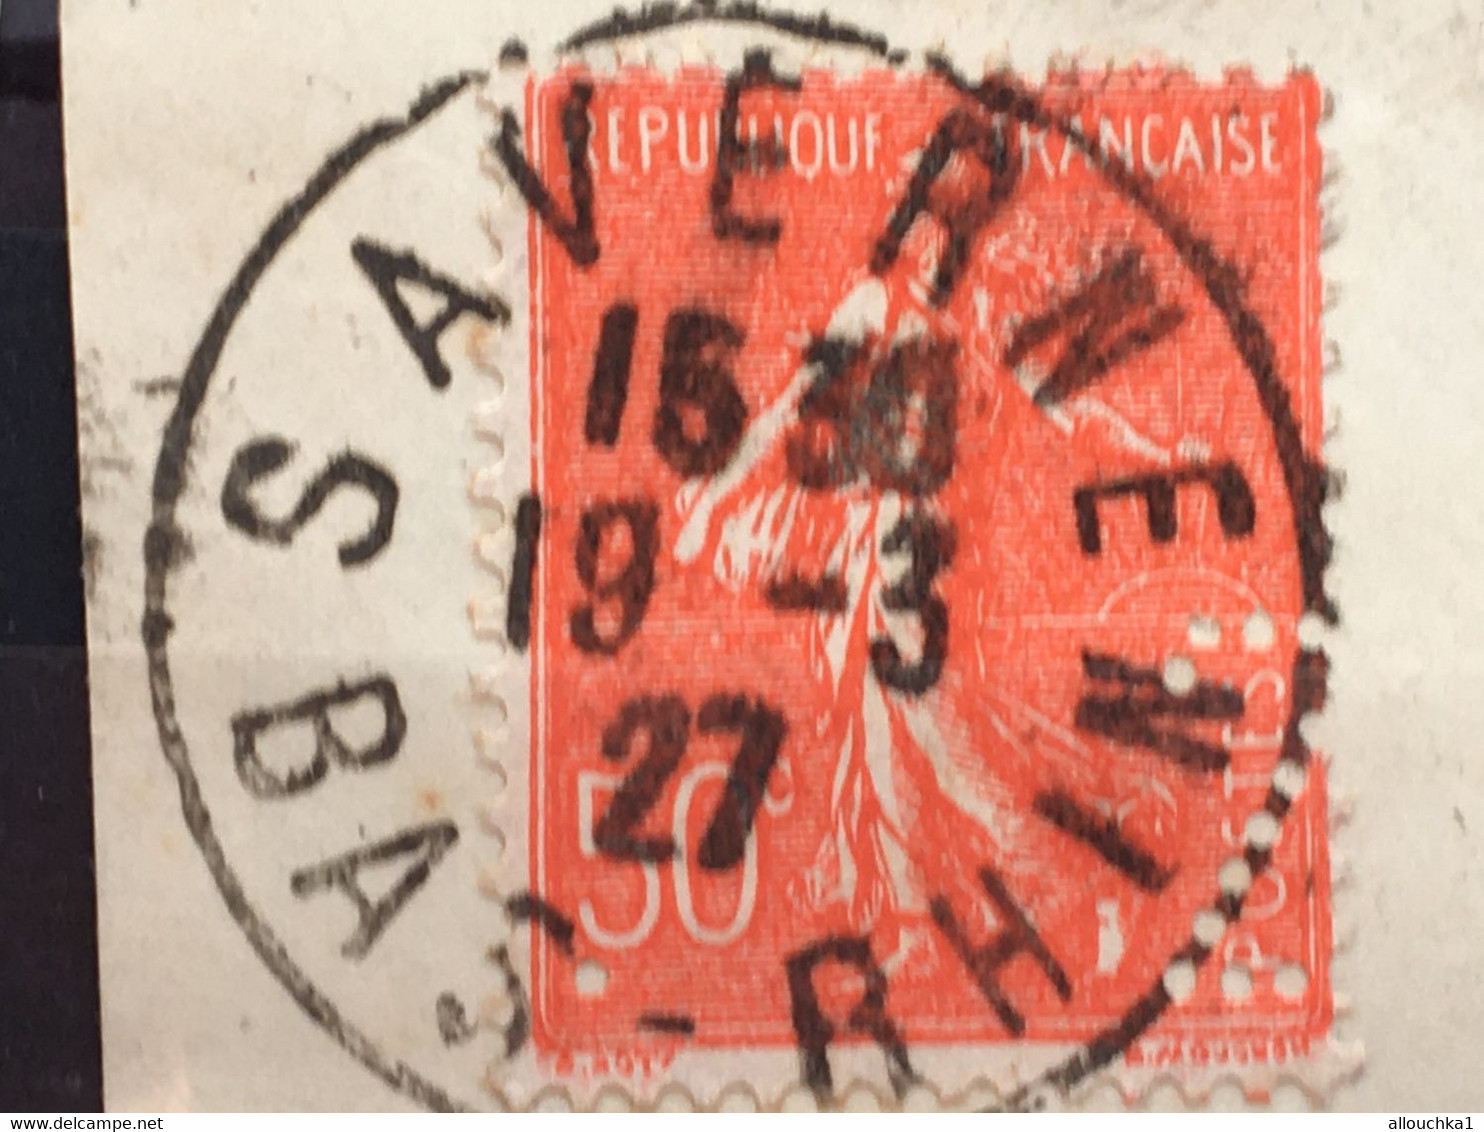 France-Semeuse 194/199 sur Fragments 23 Timbres stamp Perforé, Perforés,Perfin Perfins,Perforatis,Perforated,Perforata